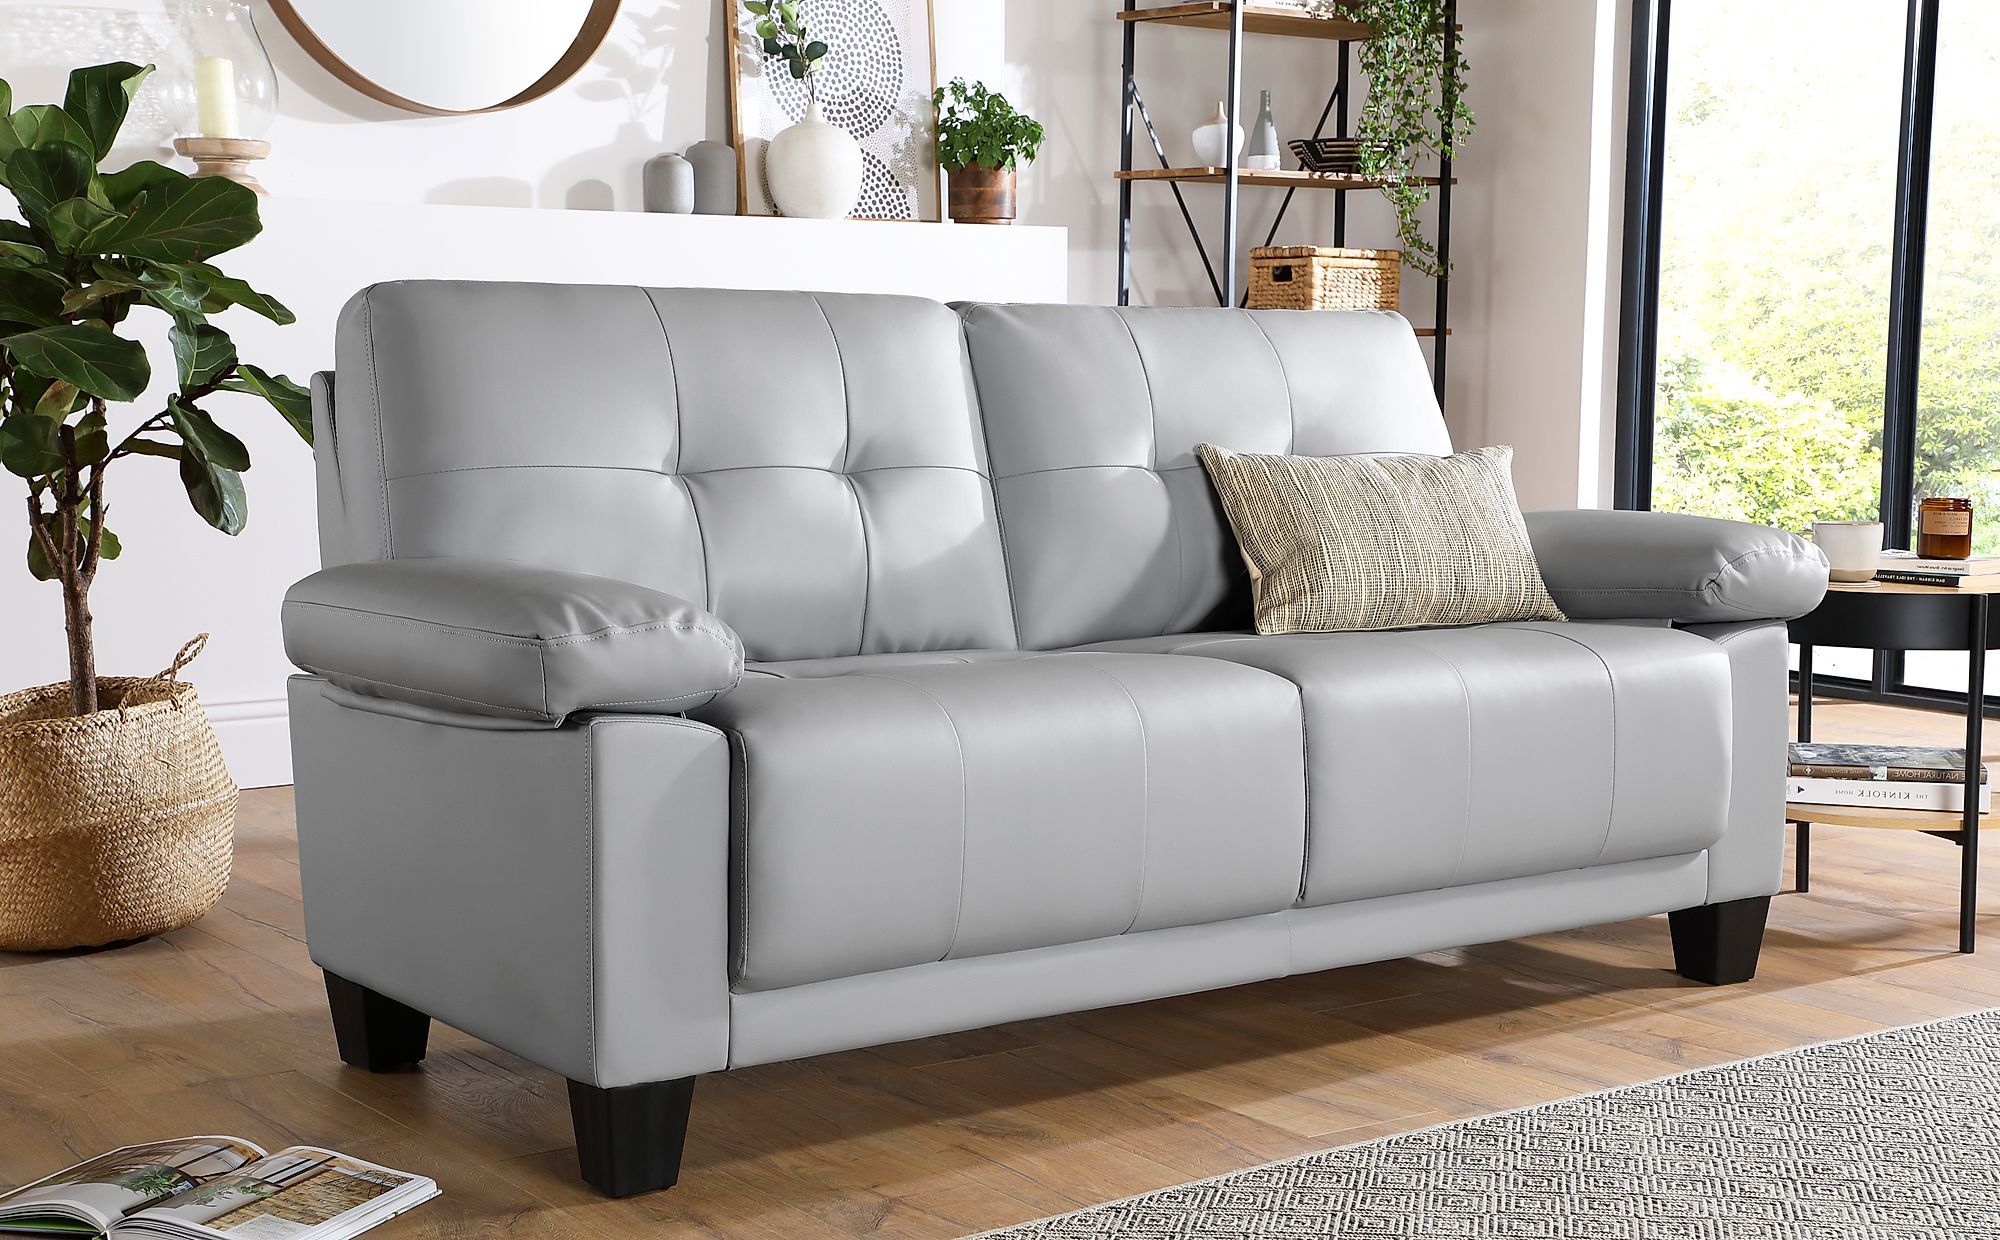 Linton Small Light Grey Leather 3 Seater Sofa (View 14 of 15)